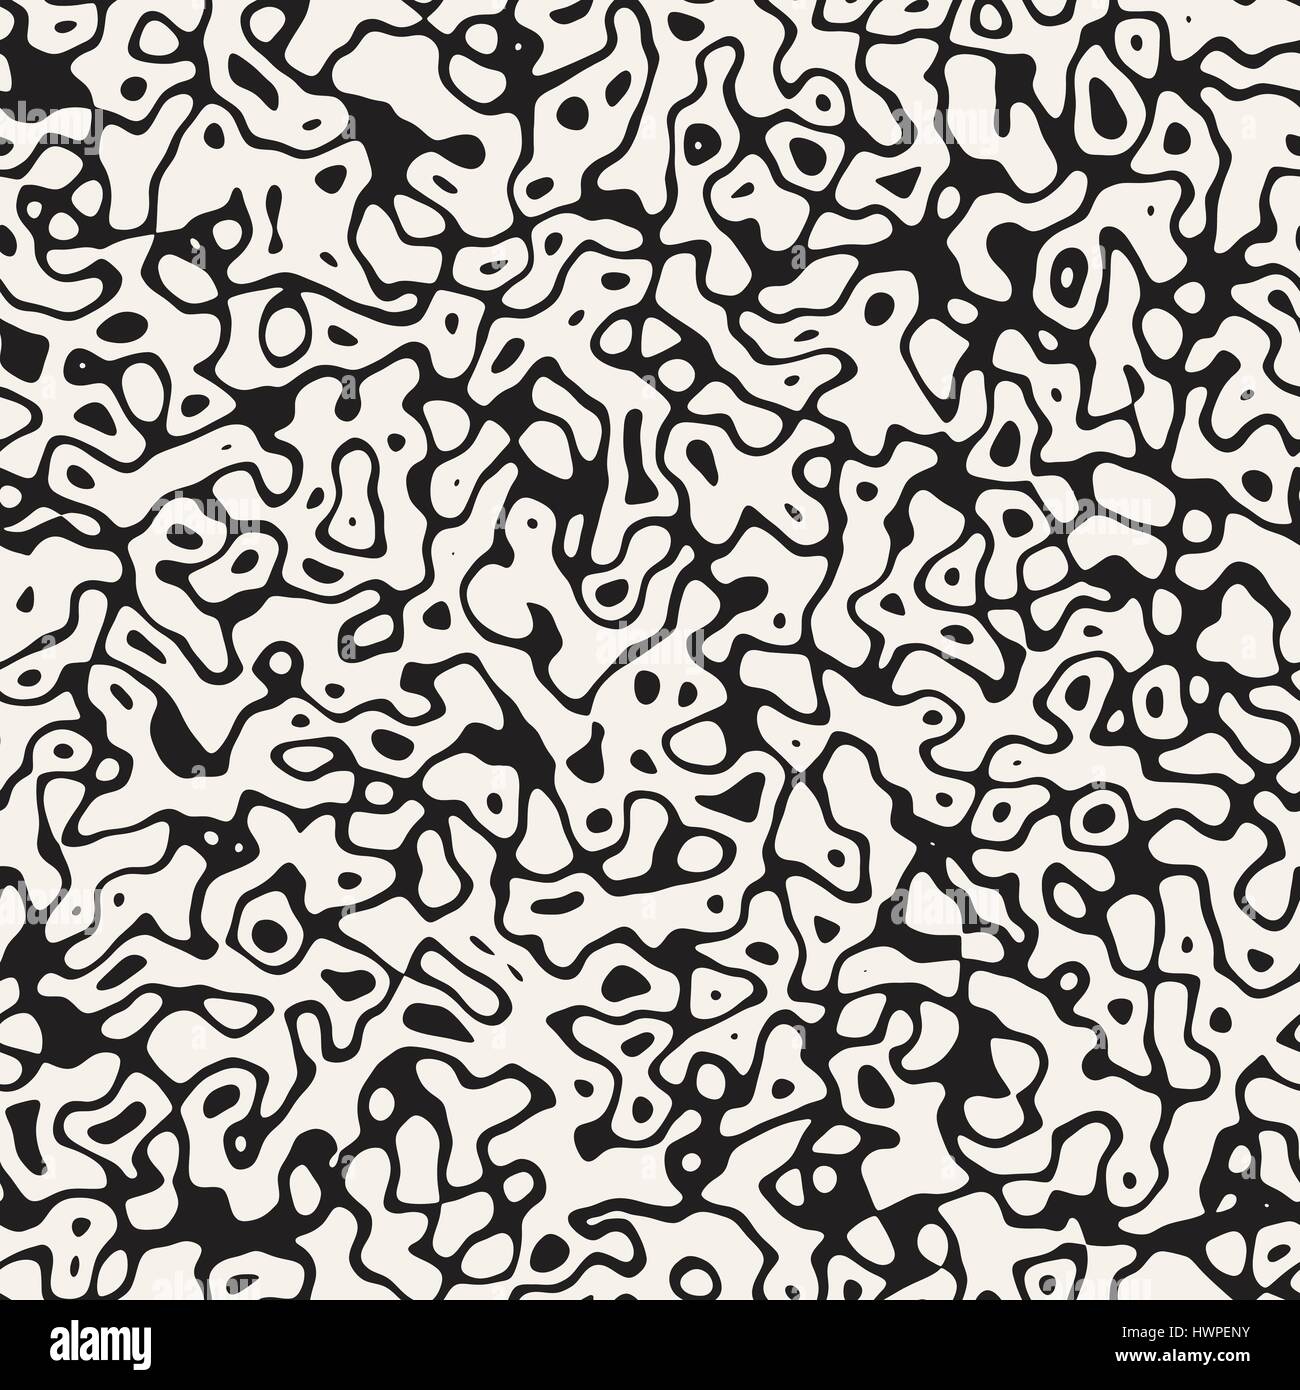 Noise Grunge Abstract Texture. Vector Seamless Black And White Pattern. Stock Vector